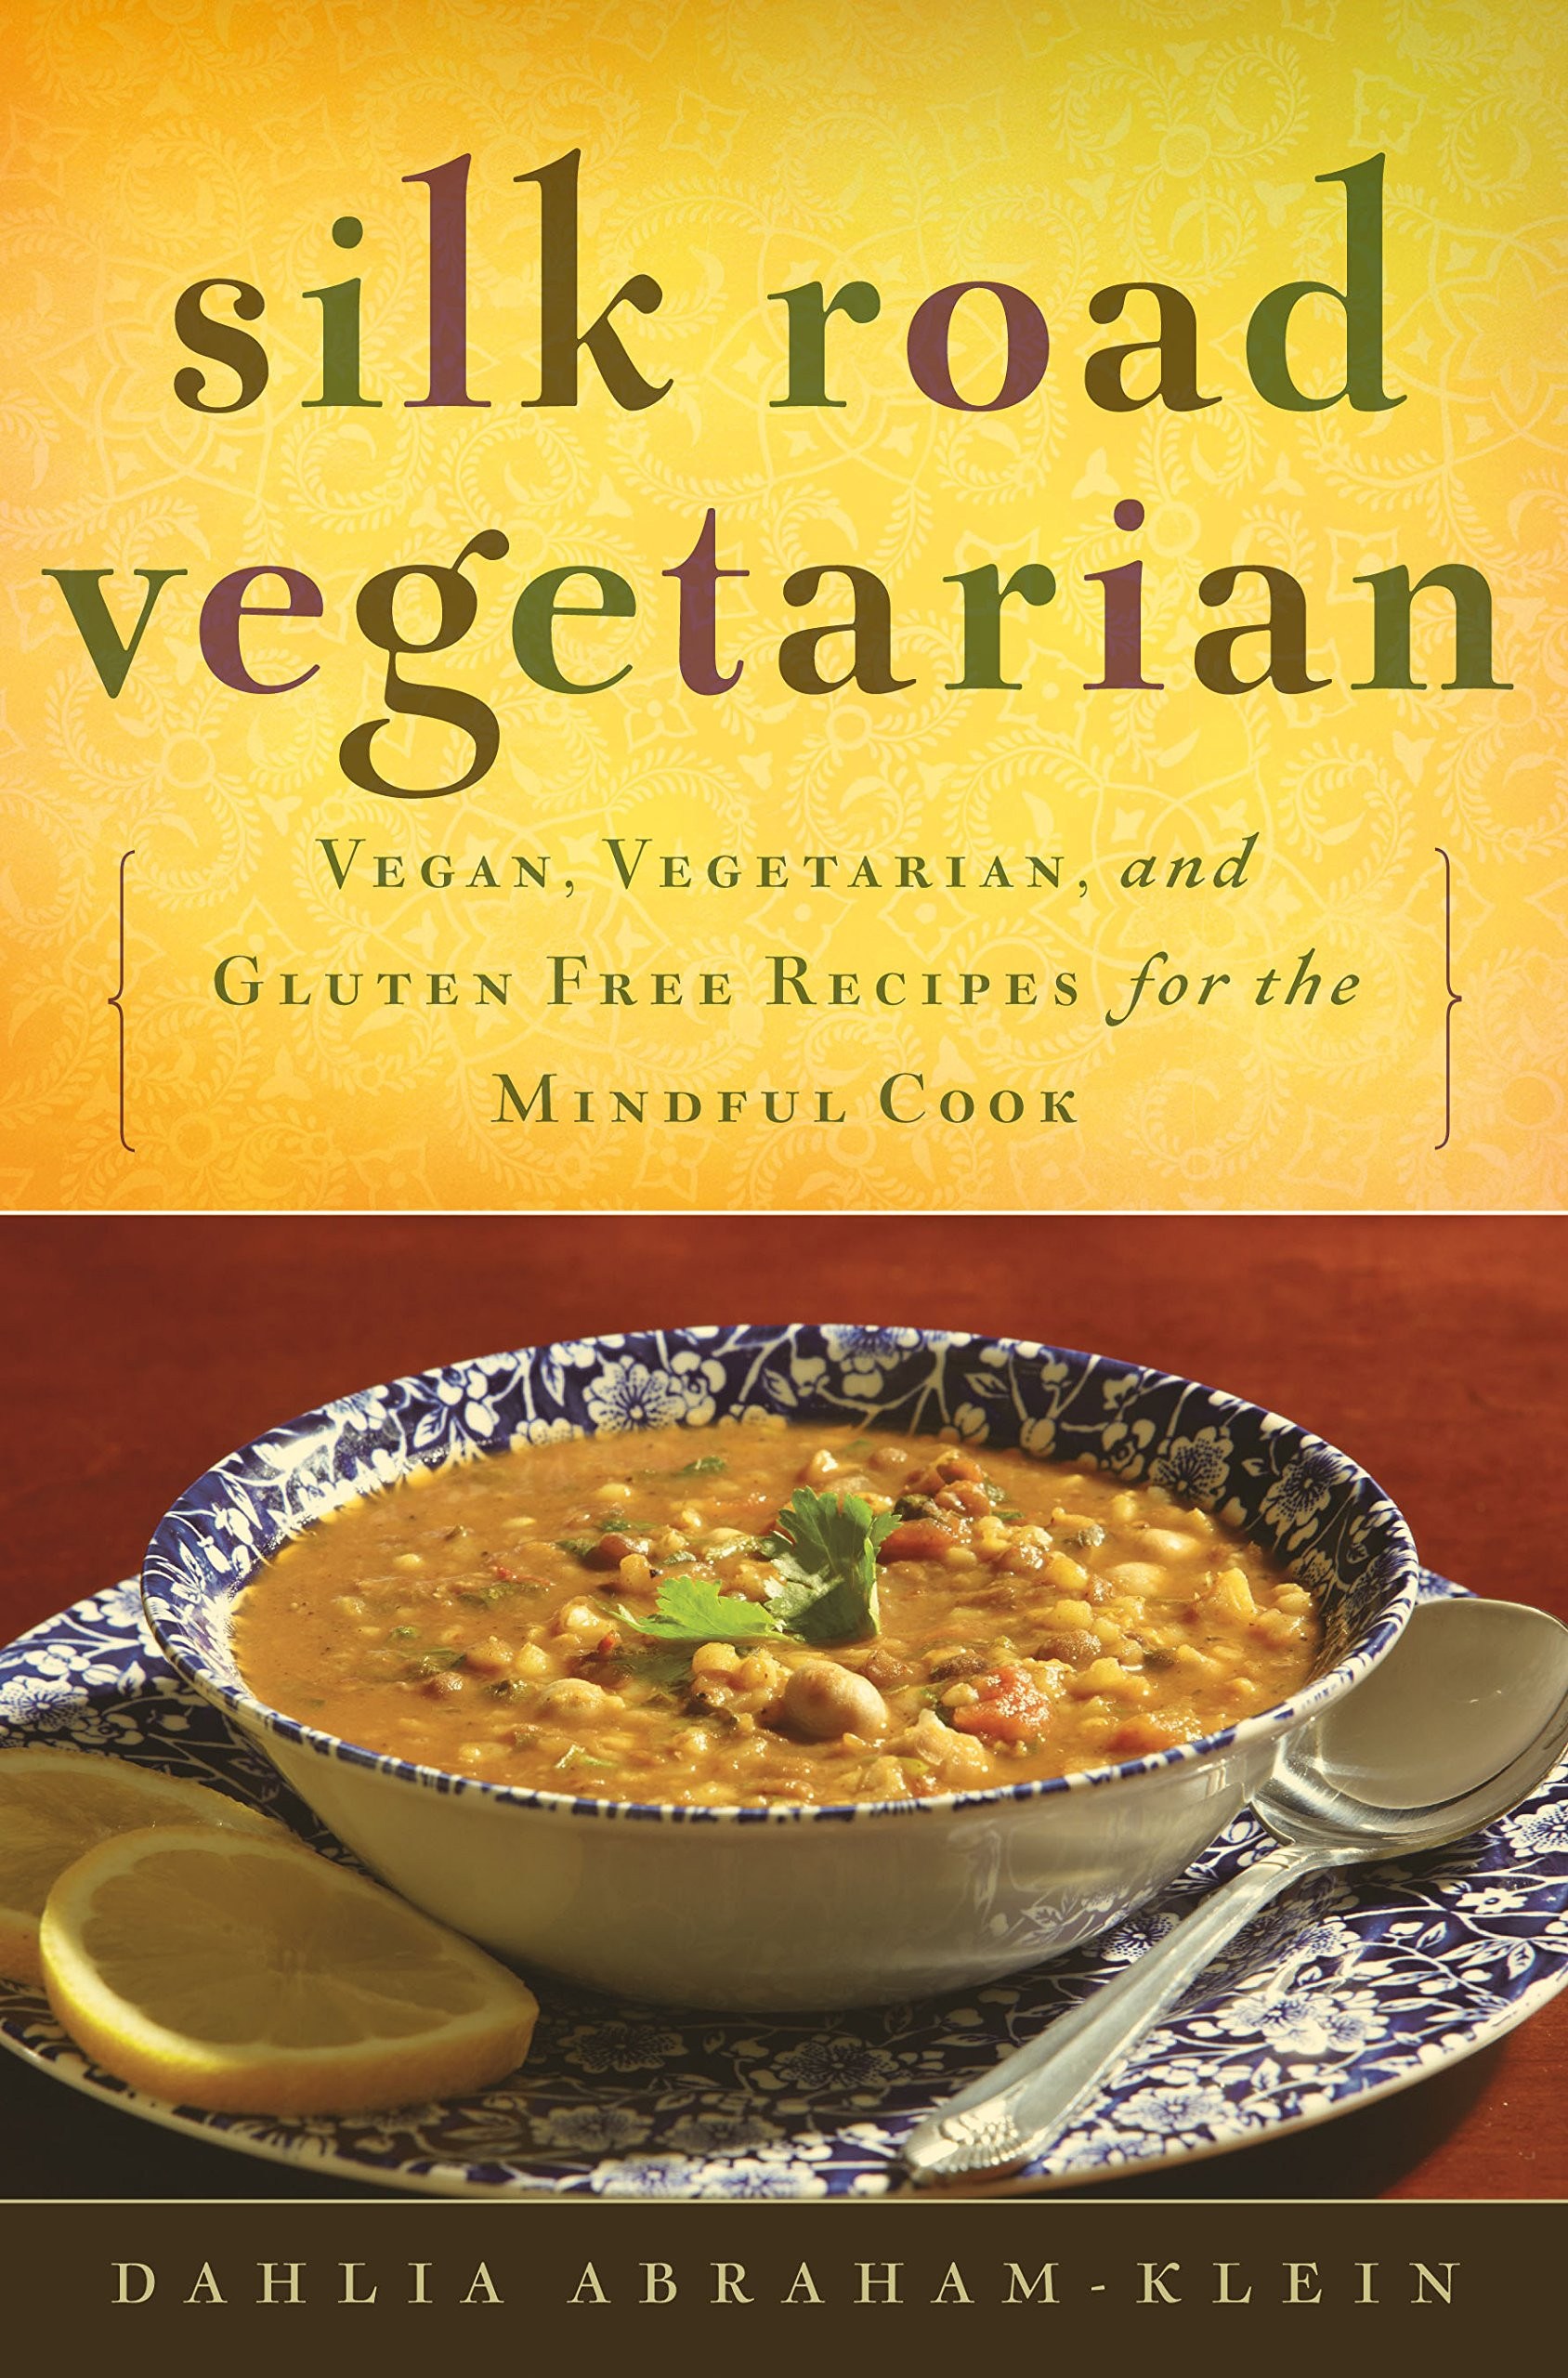 Vegetarian And Gluten Free Recipes
 The Greatest Gluten Free Recipes And Vegan Cookbooks That